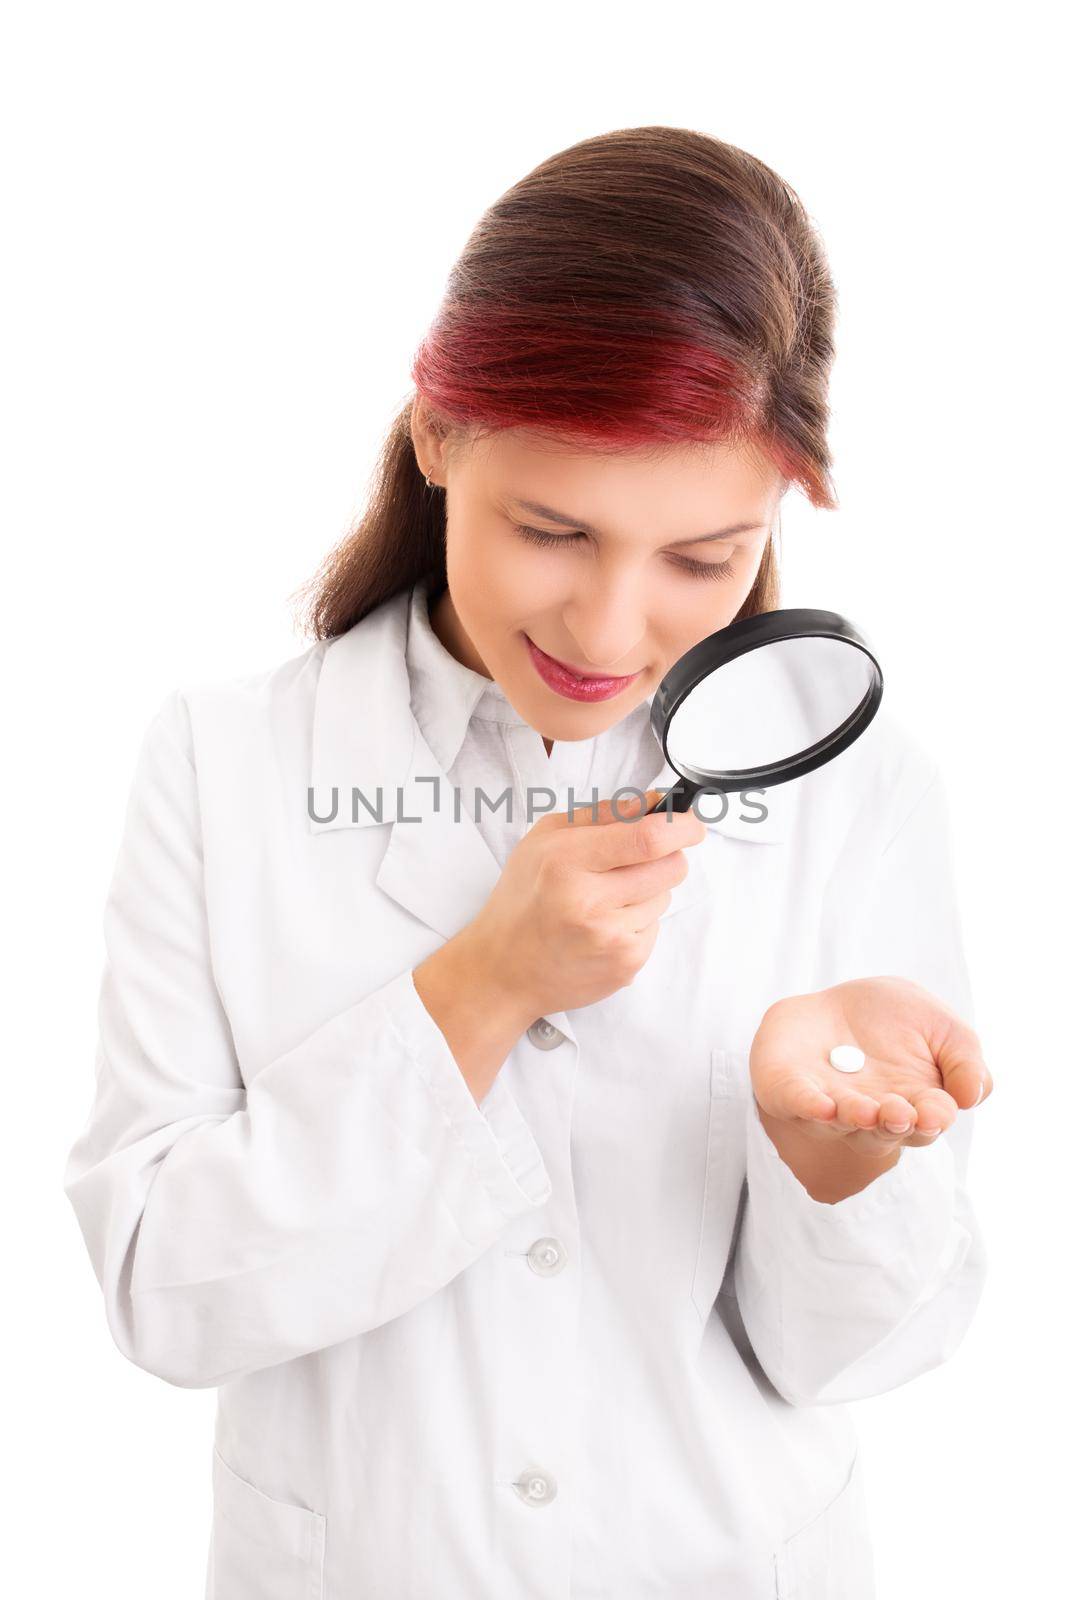 Beautiful smiling young doctor in white lab coat examining a white pill though a magnifying glass, isolated on white background. Scientist with magnifying glass examining pill. Medication scrutiny concept.